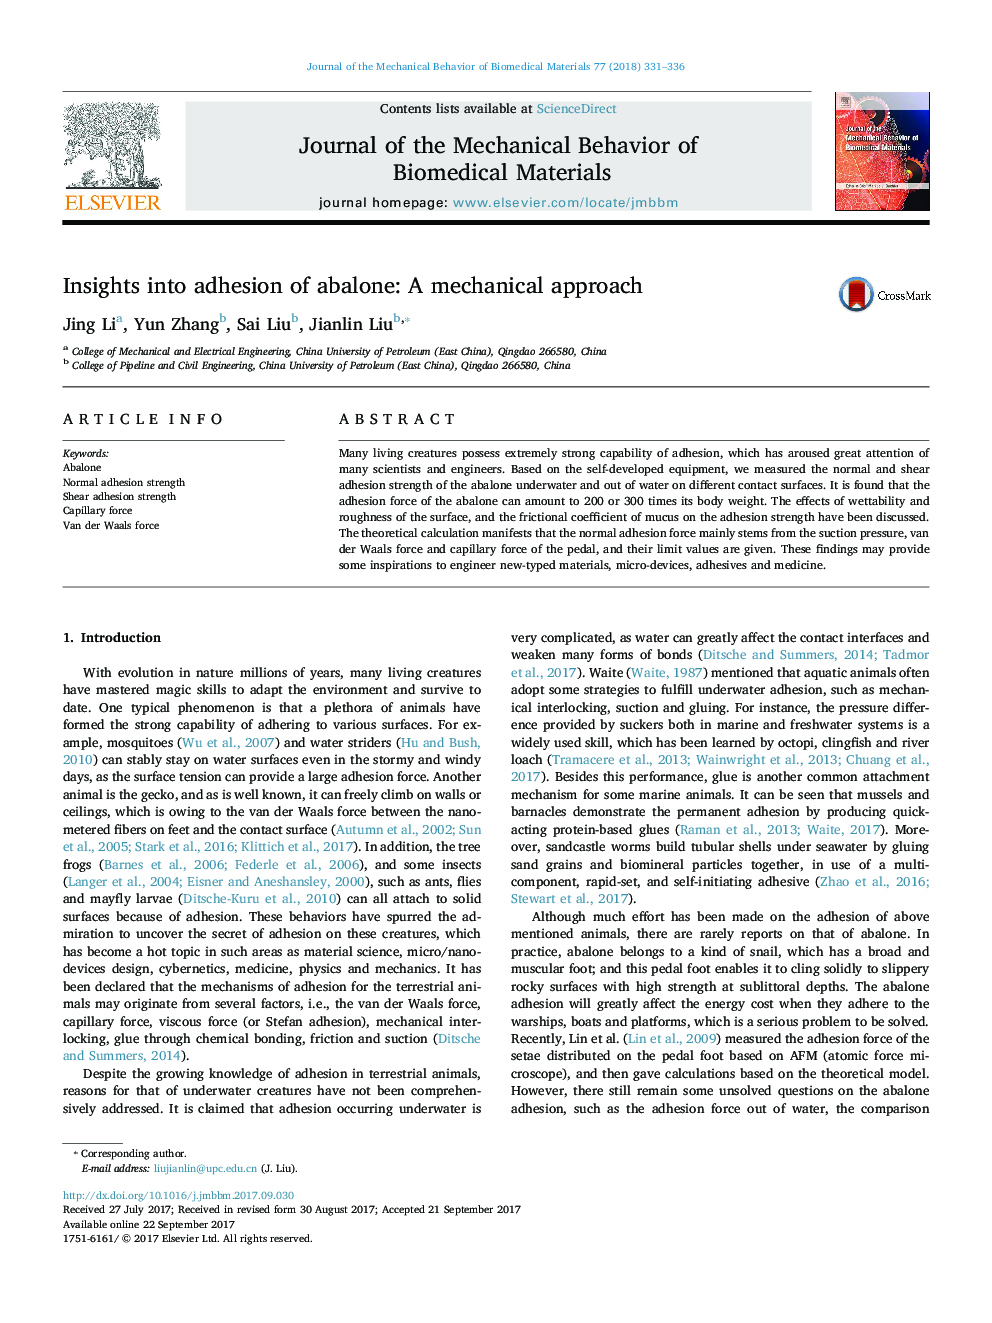 Insights into adhesion of abalone: A mechanical approach